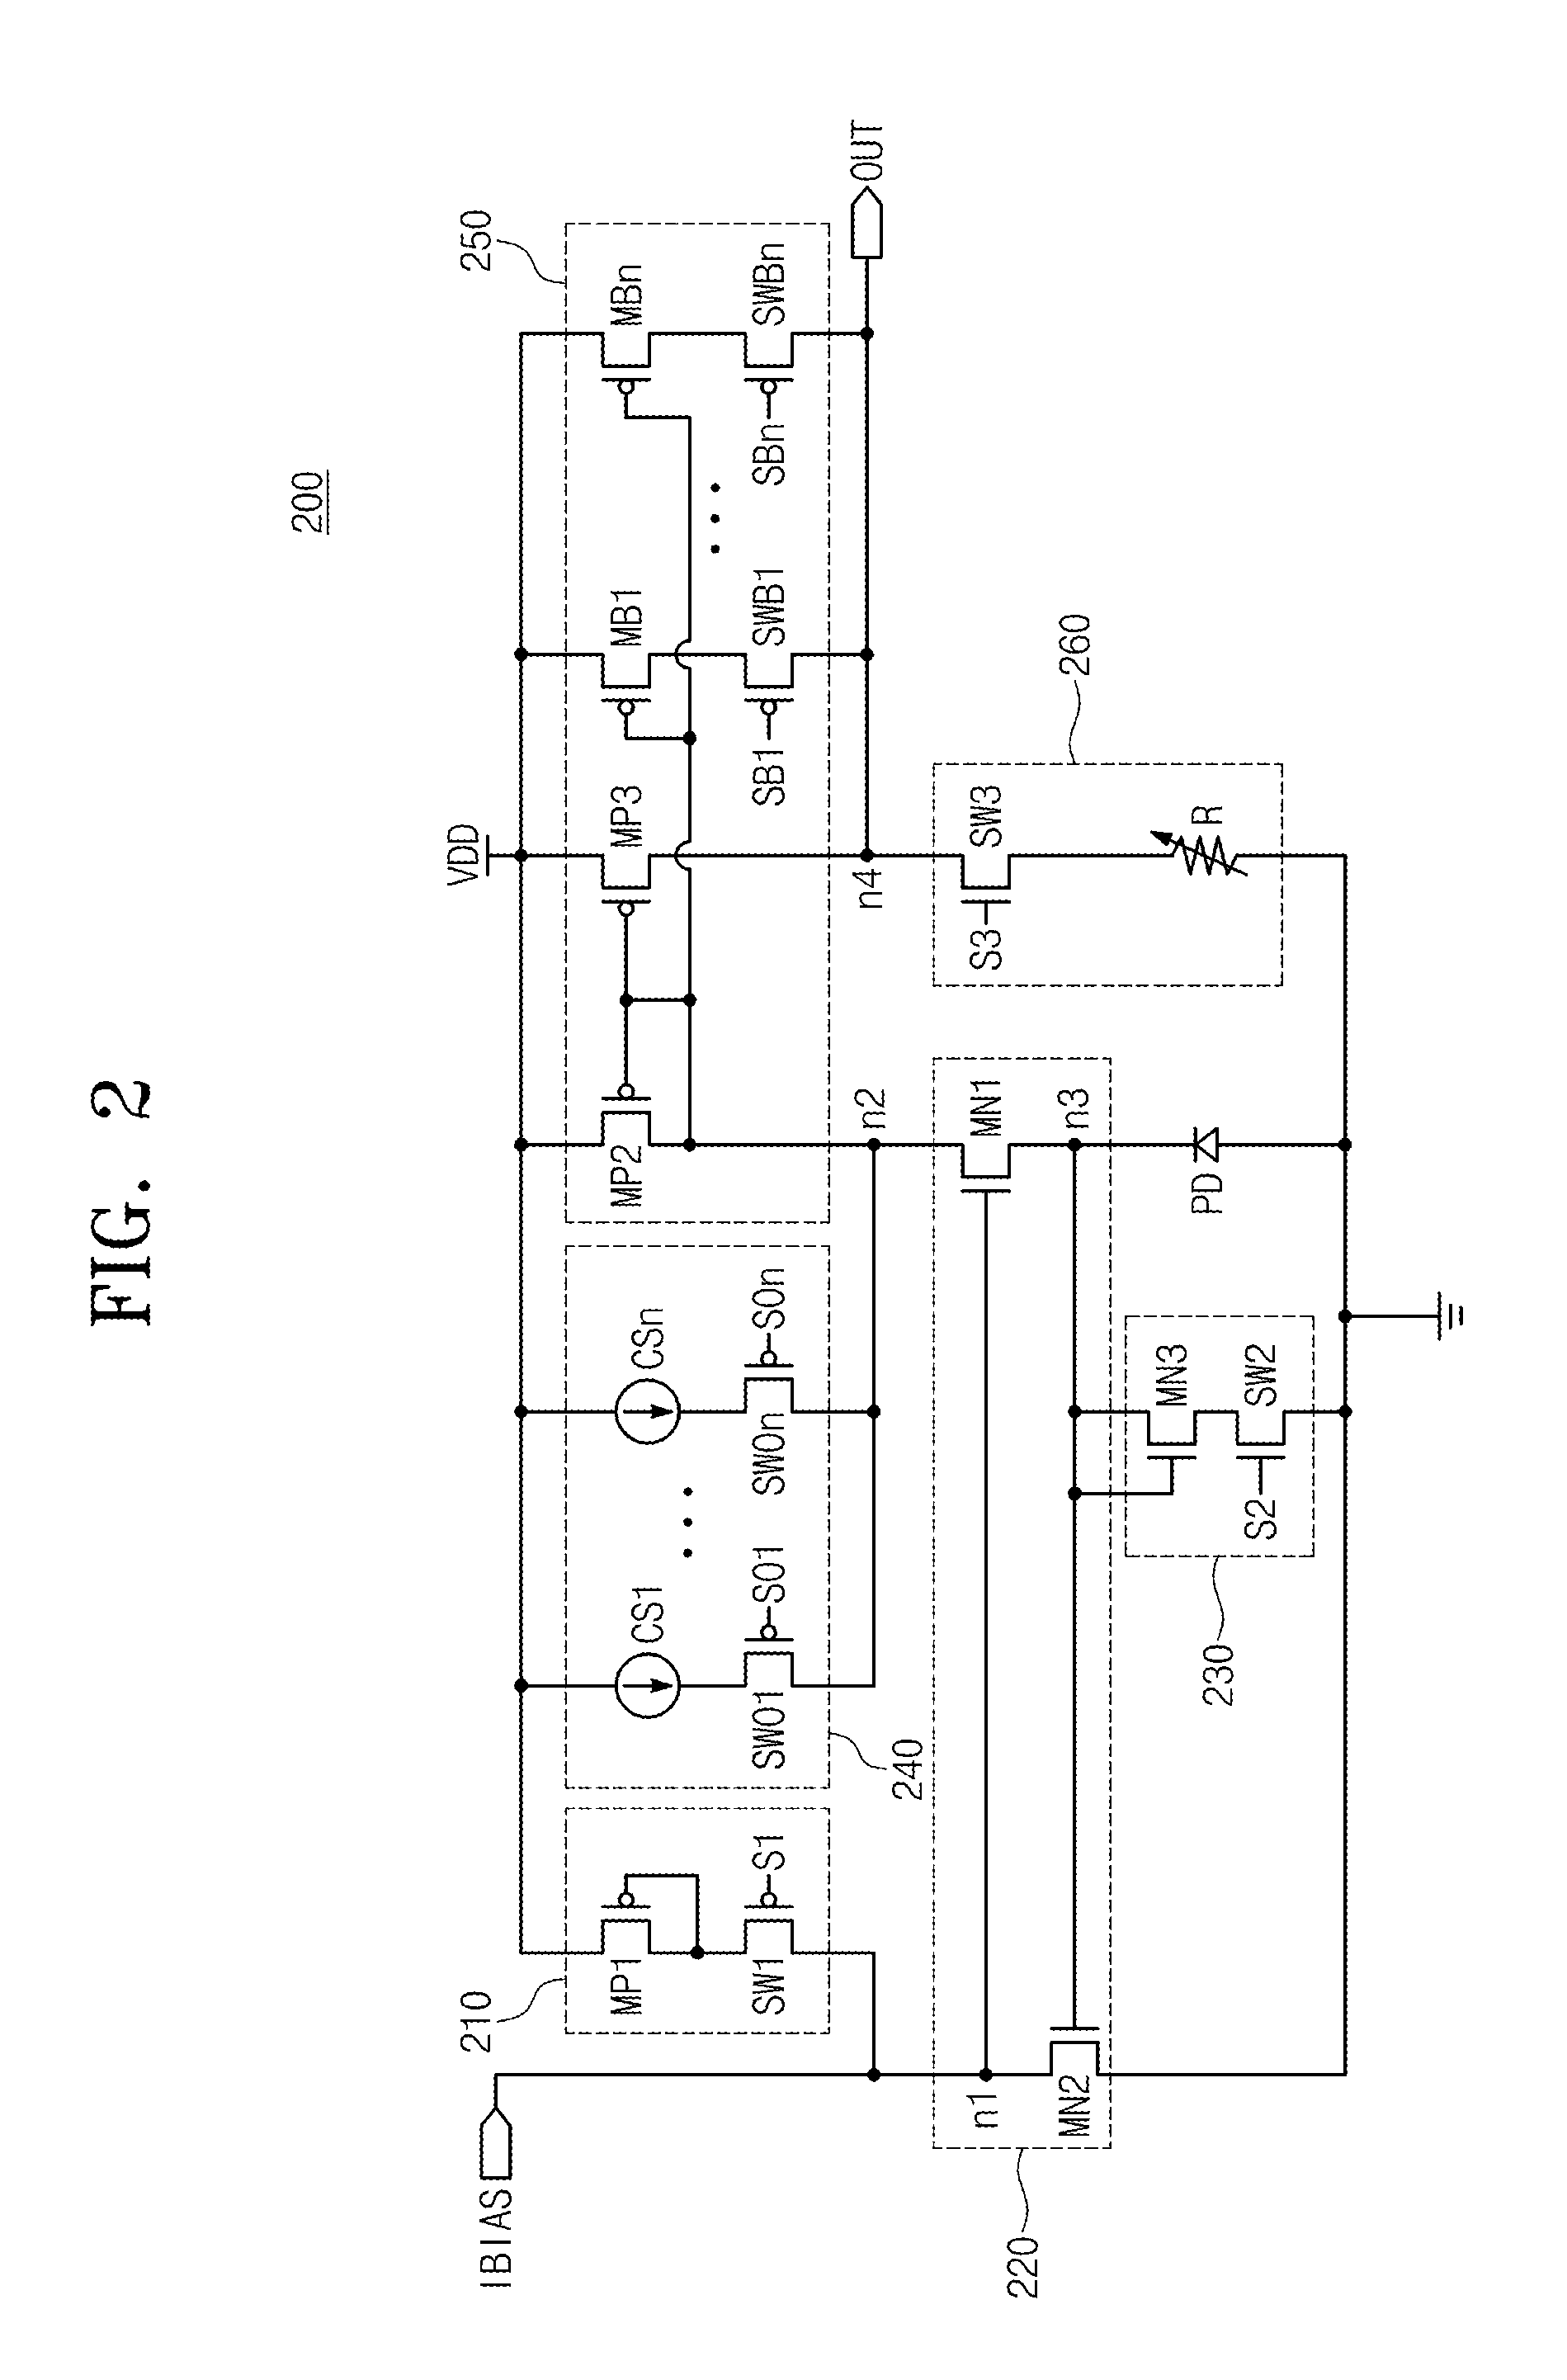 Current-voltage conversion amplifier circuit including multiplier and multi input amplifier